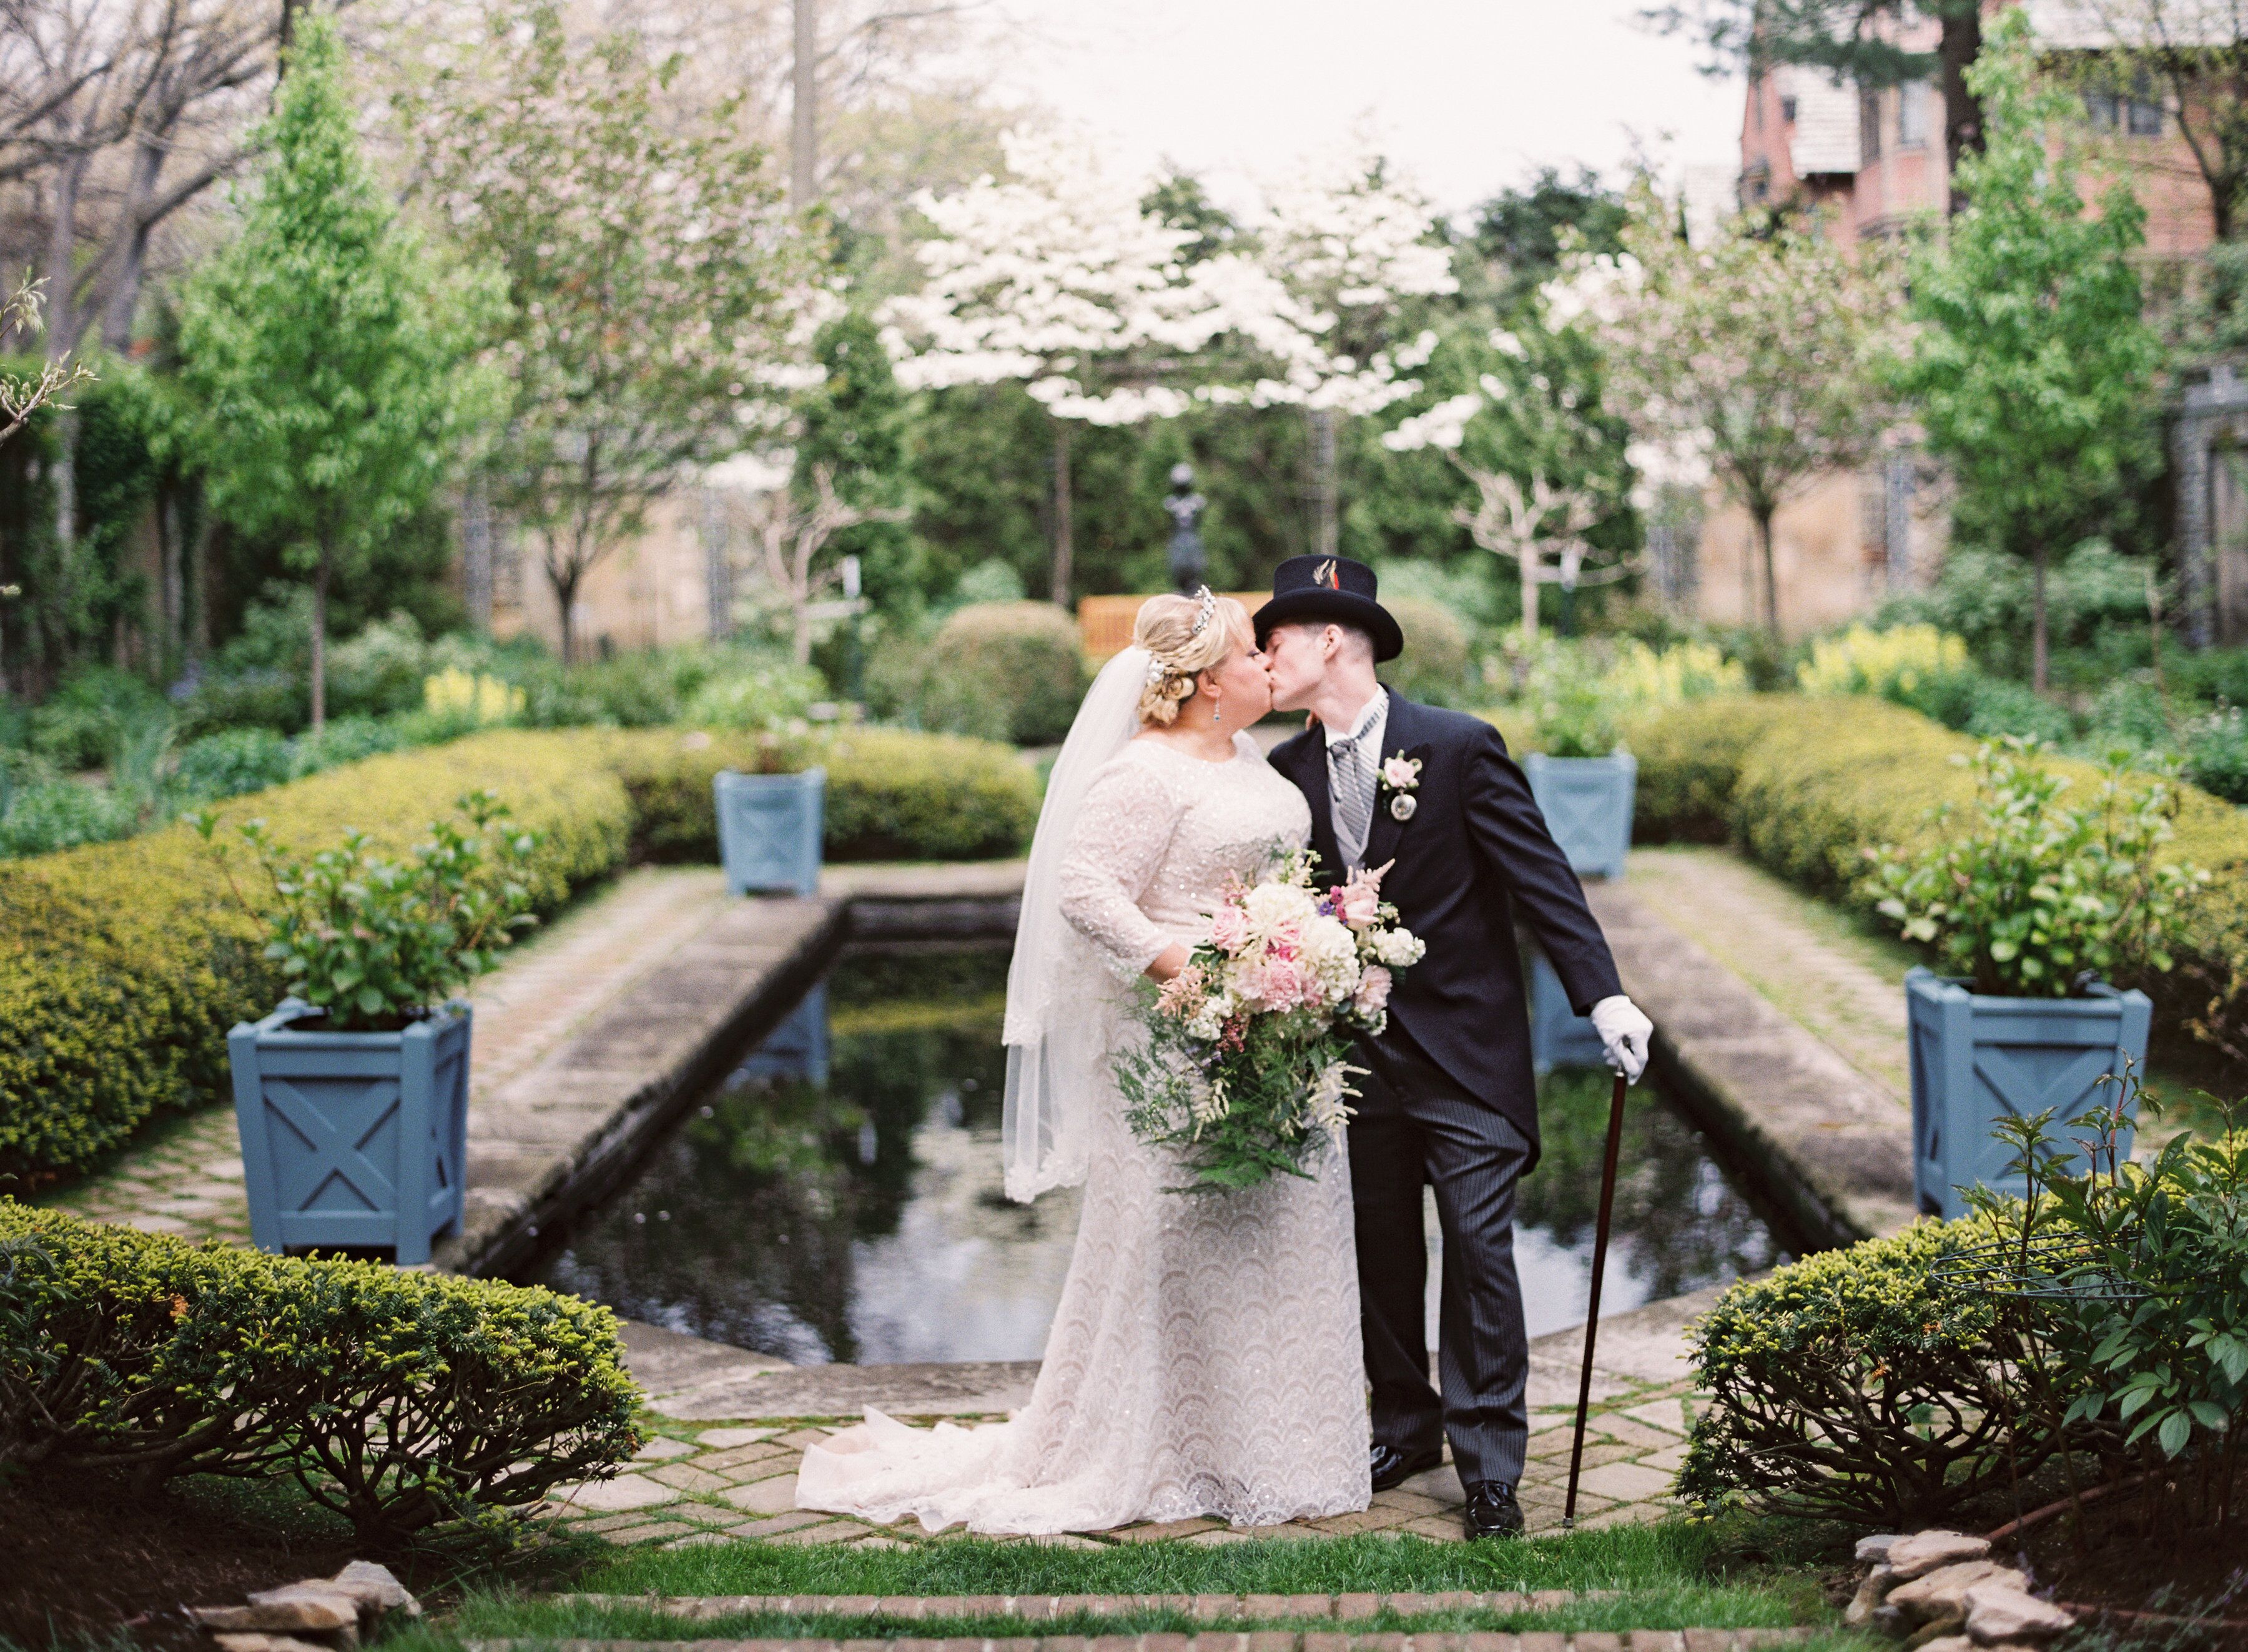 A Whimsical Garden Wedding At Stan Hywet Hall And Gardens In Akron